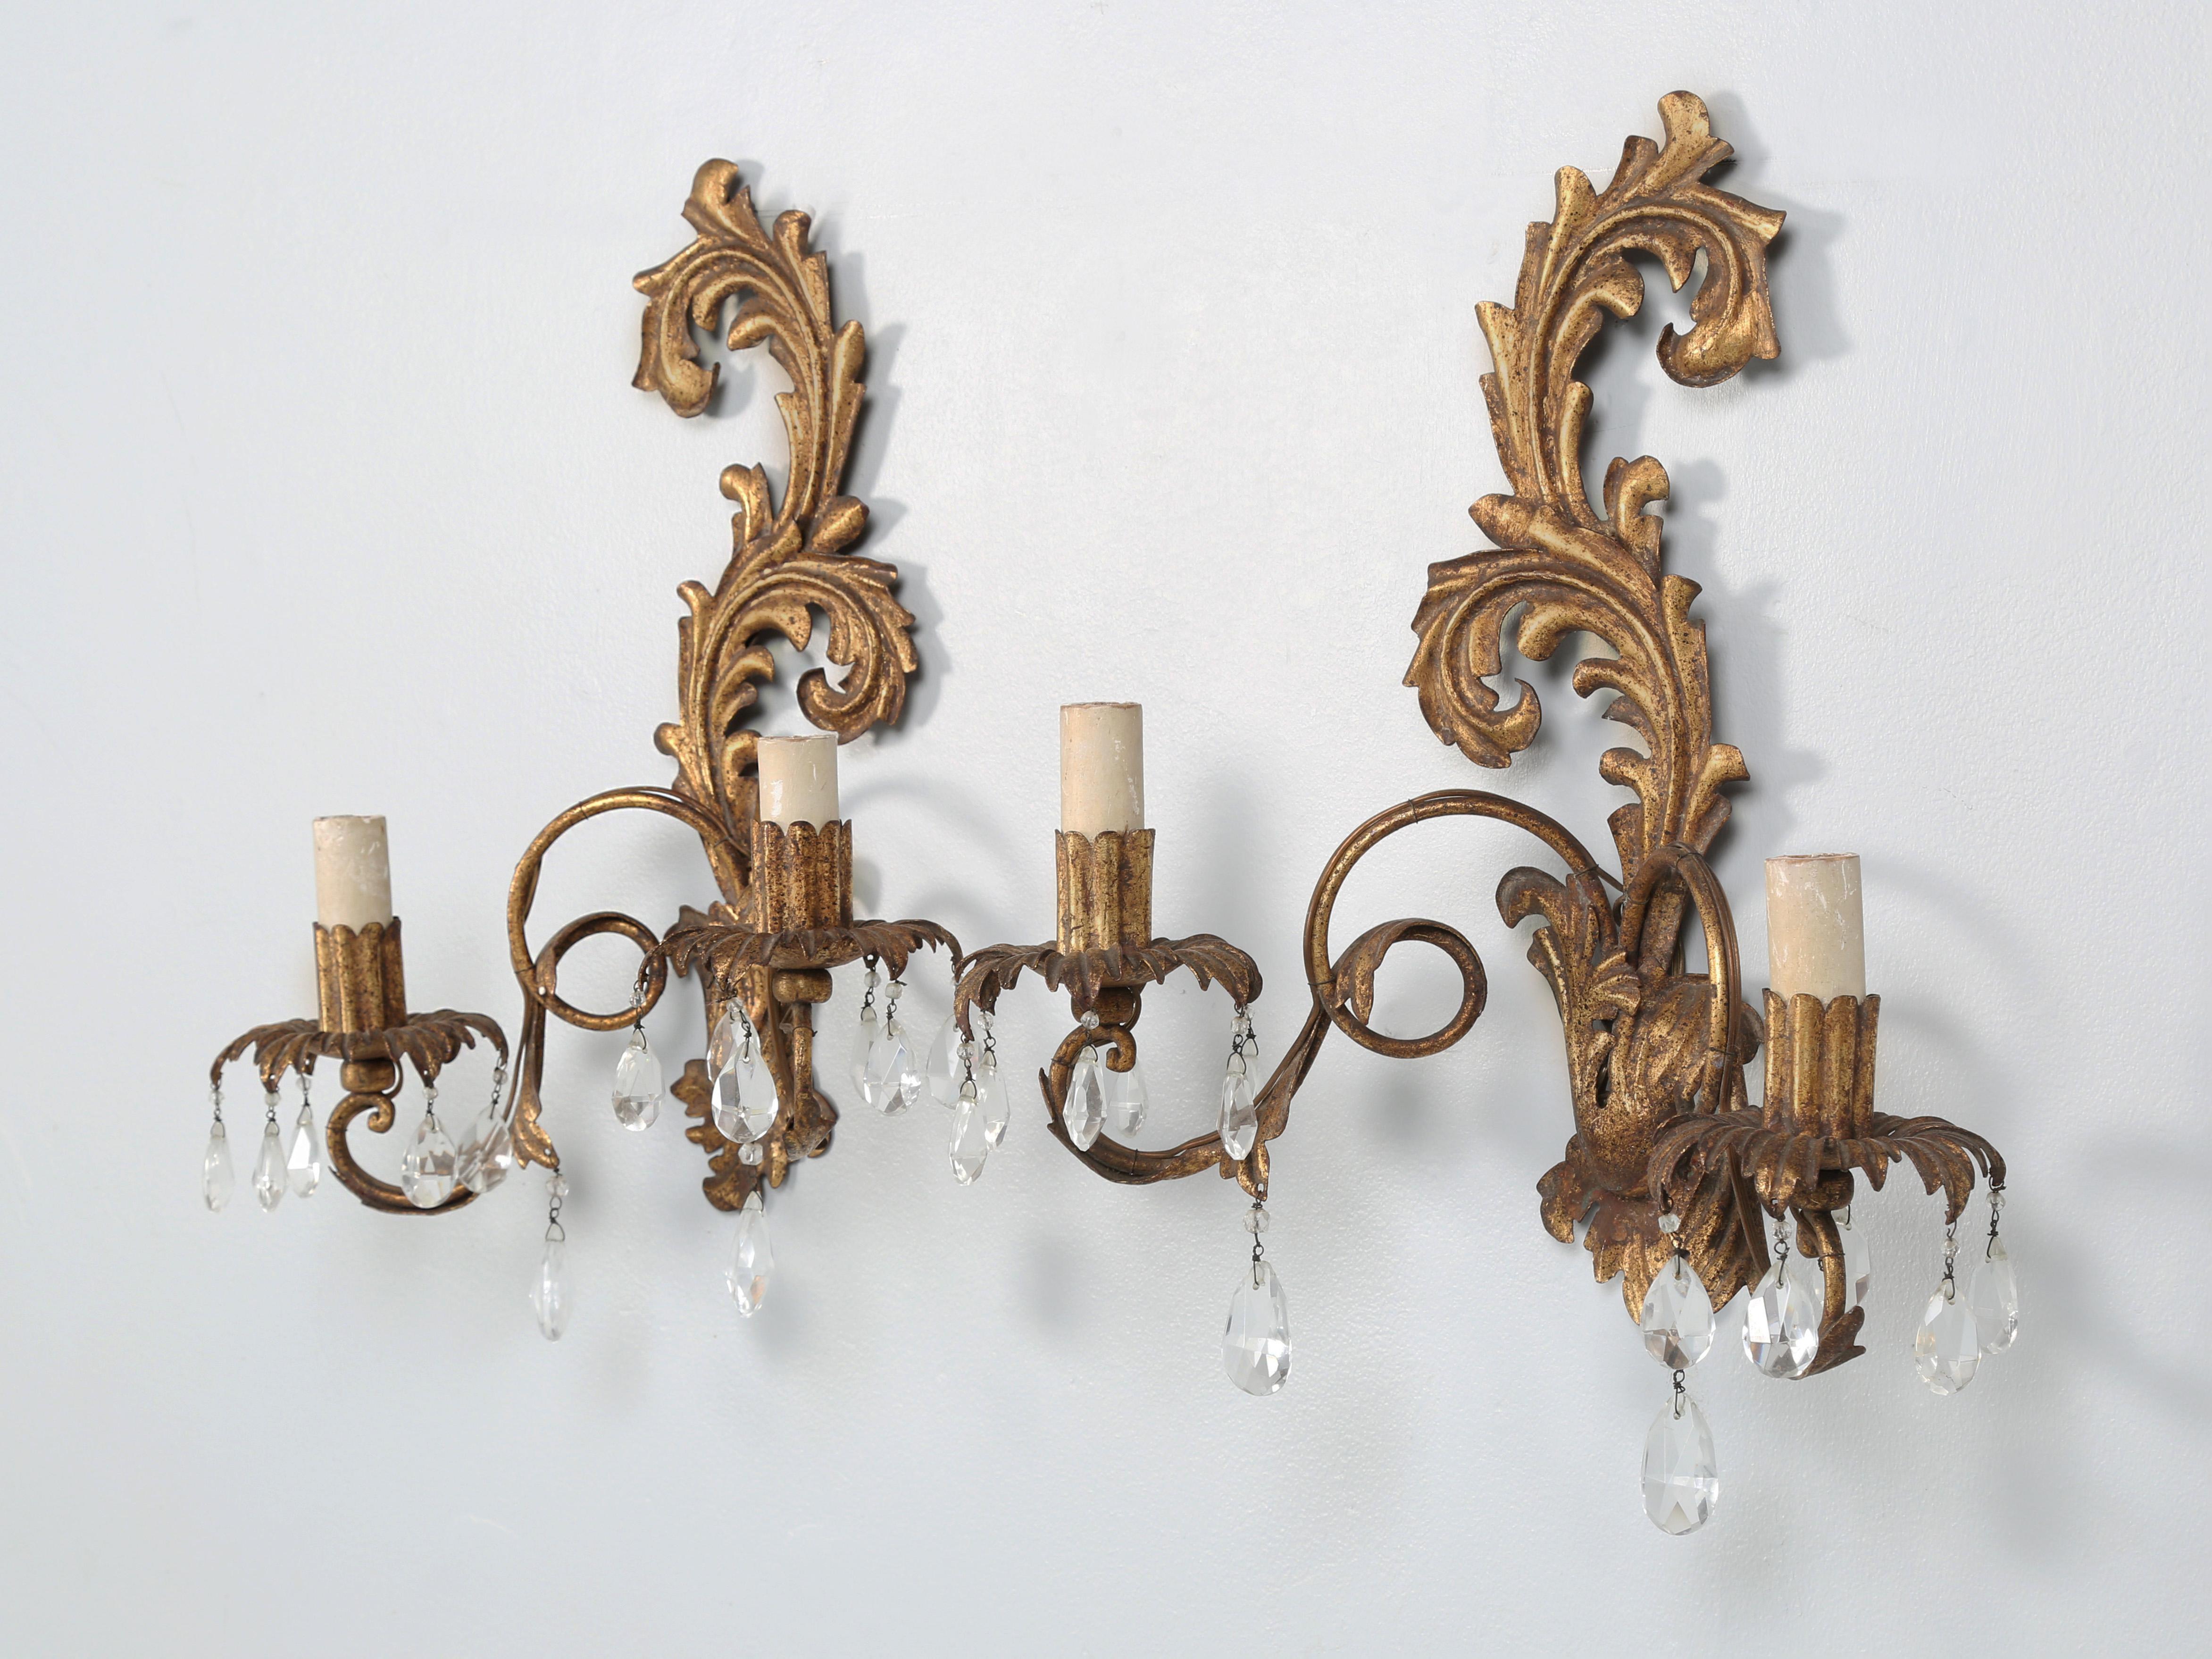 Pair of Vintage French Wall Sconces in their Original Gilded Finish. The pair of Vintage Sconces look to have been made post War and are in nice original condition with a wonderful patina.